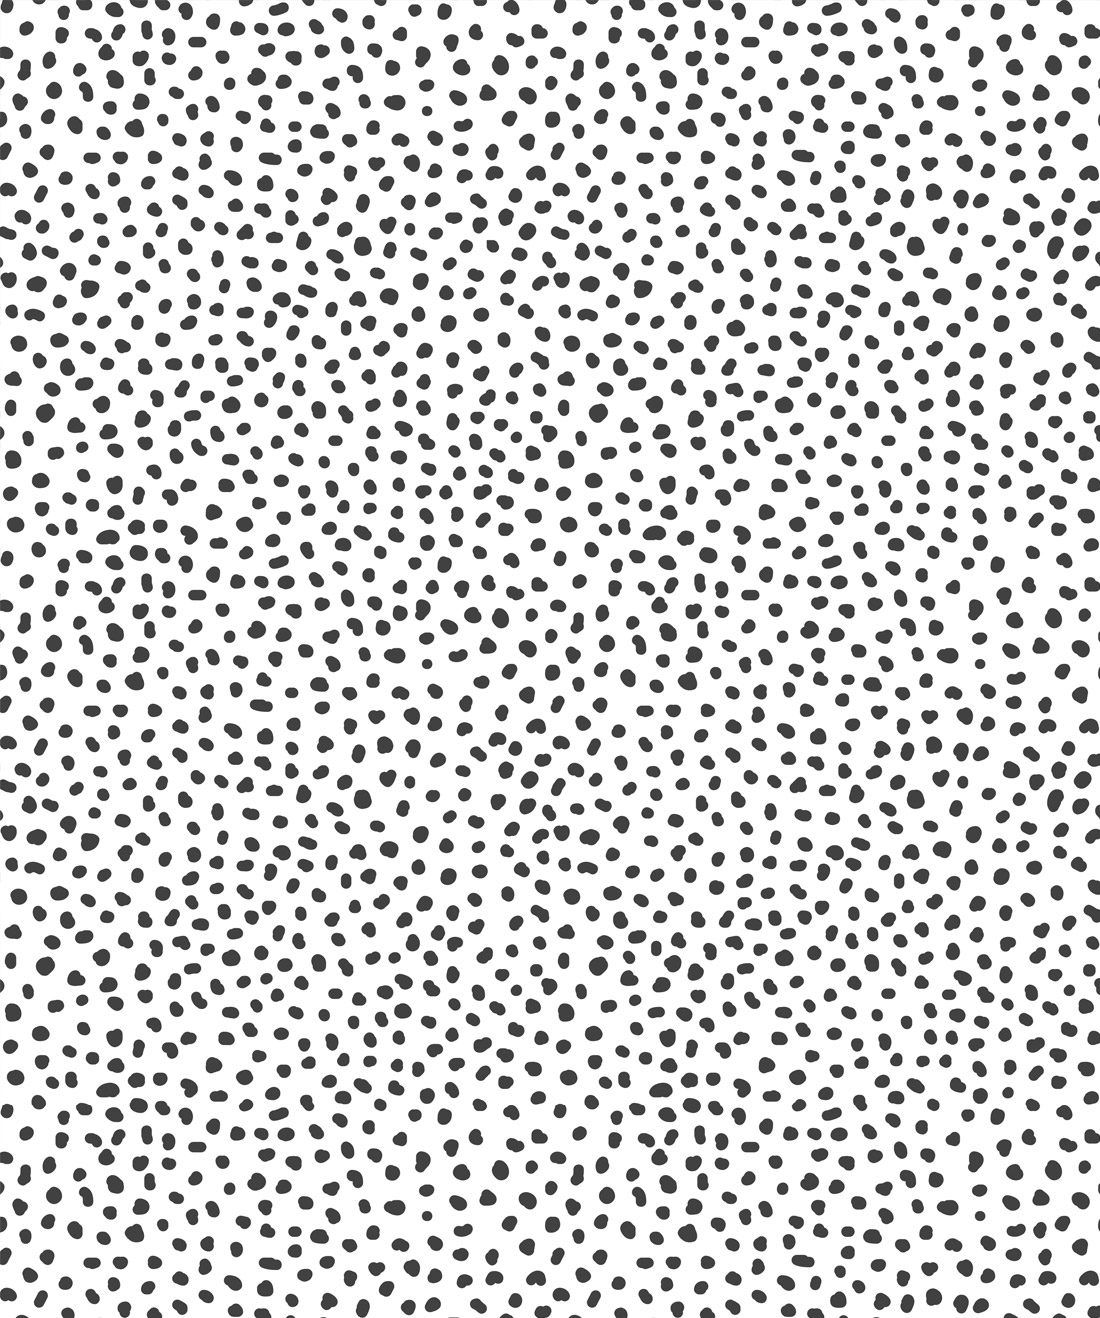 Huddy's Dots • Luxurious Spotted Wallpaper • Milton & King